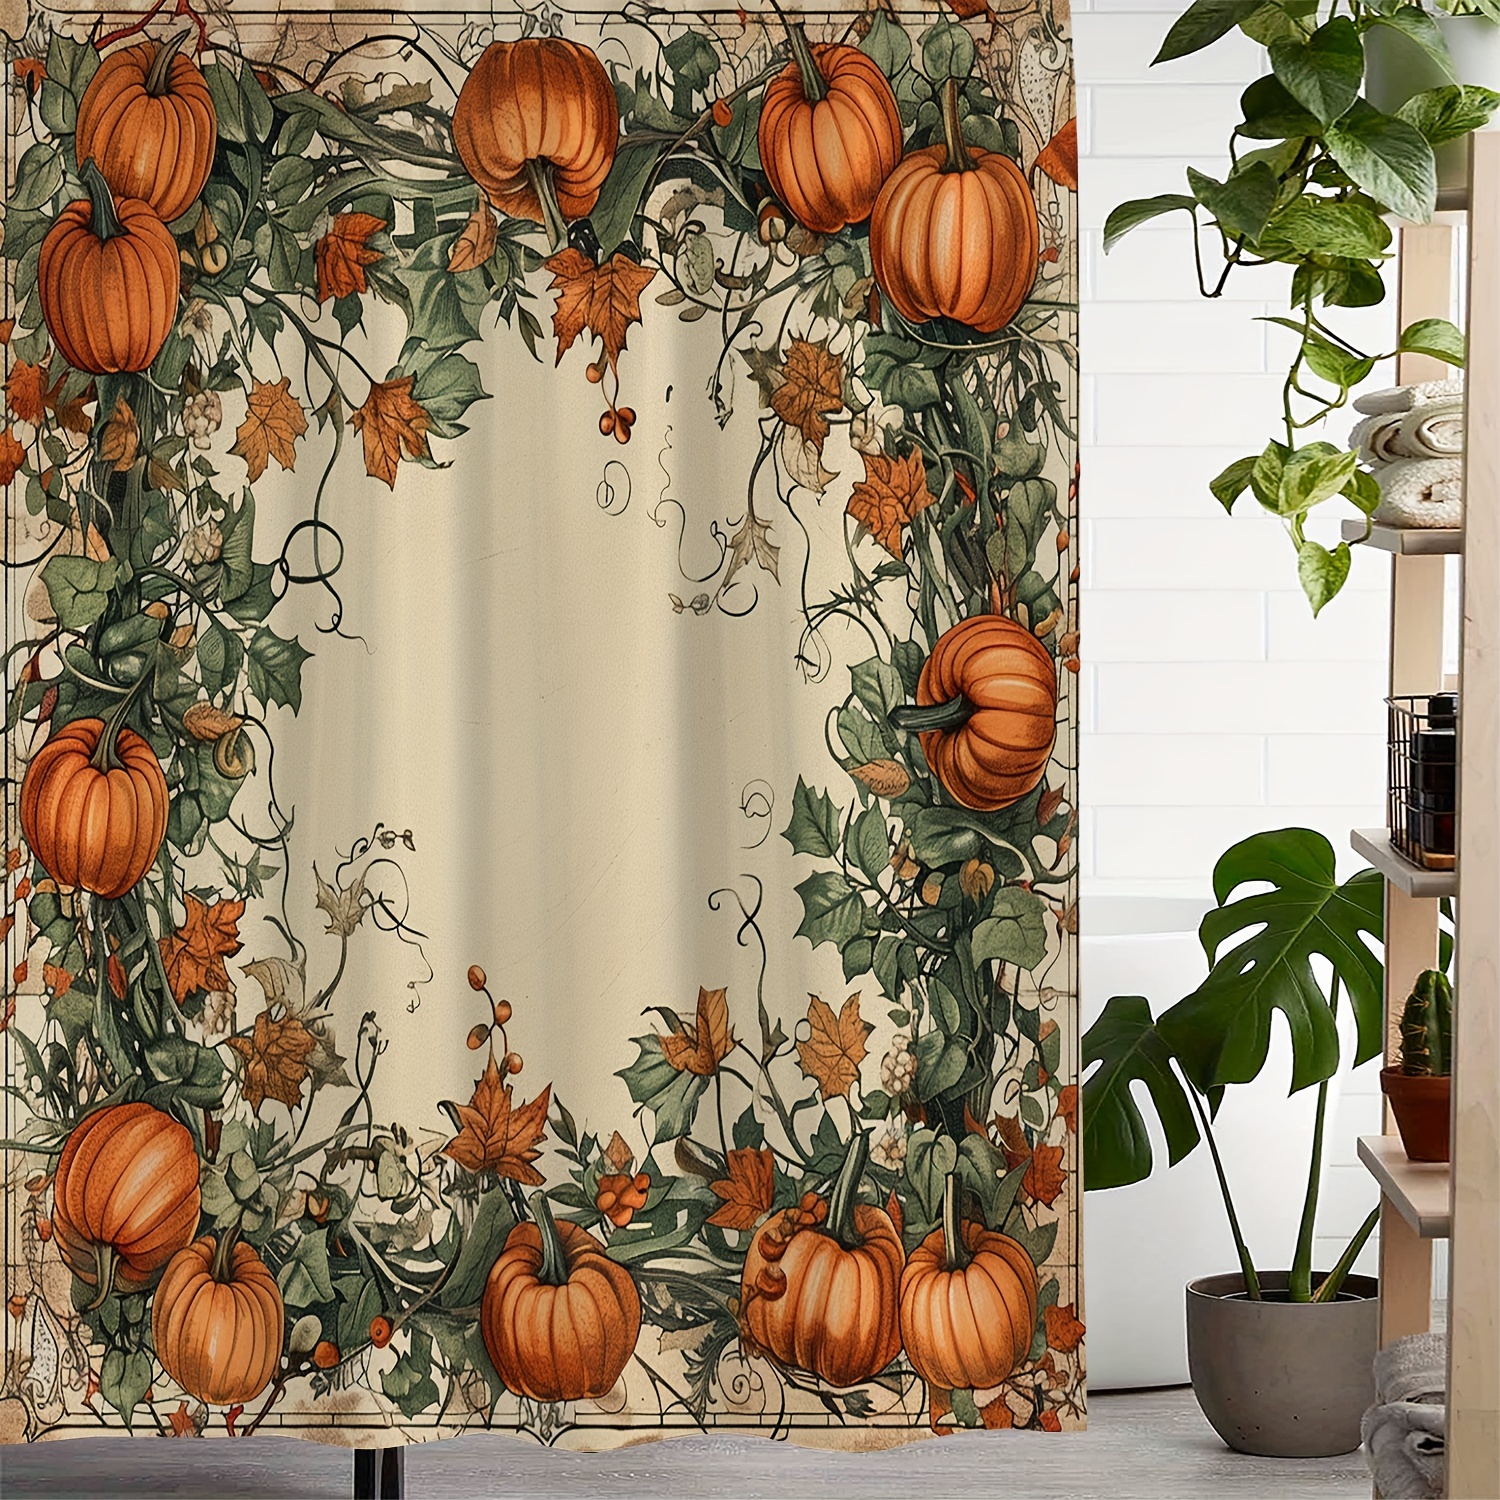 

Autumn Harvest Pumpkin Vine Print Waterproof Polyester Shower Curtain - Machine Washable, Artsy Fall Decor With 12 Hooks, Water-resistant Woven Bath Curtain